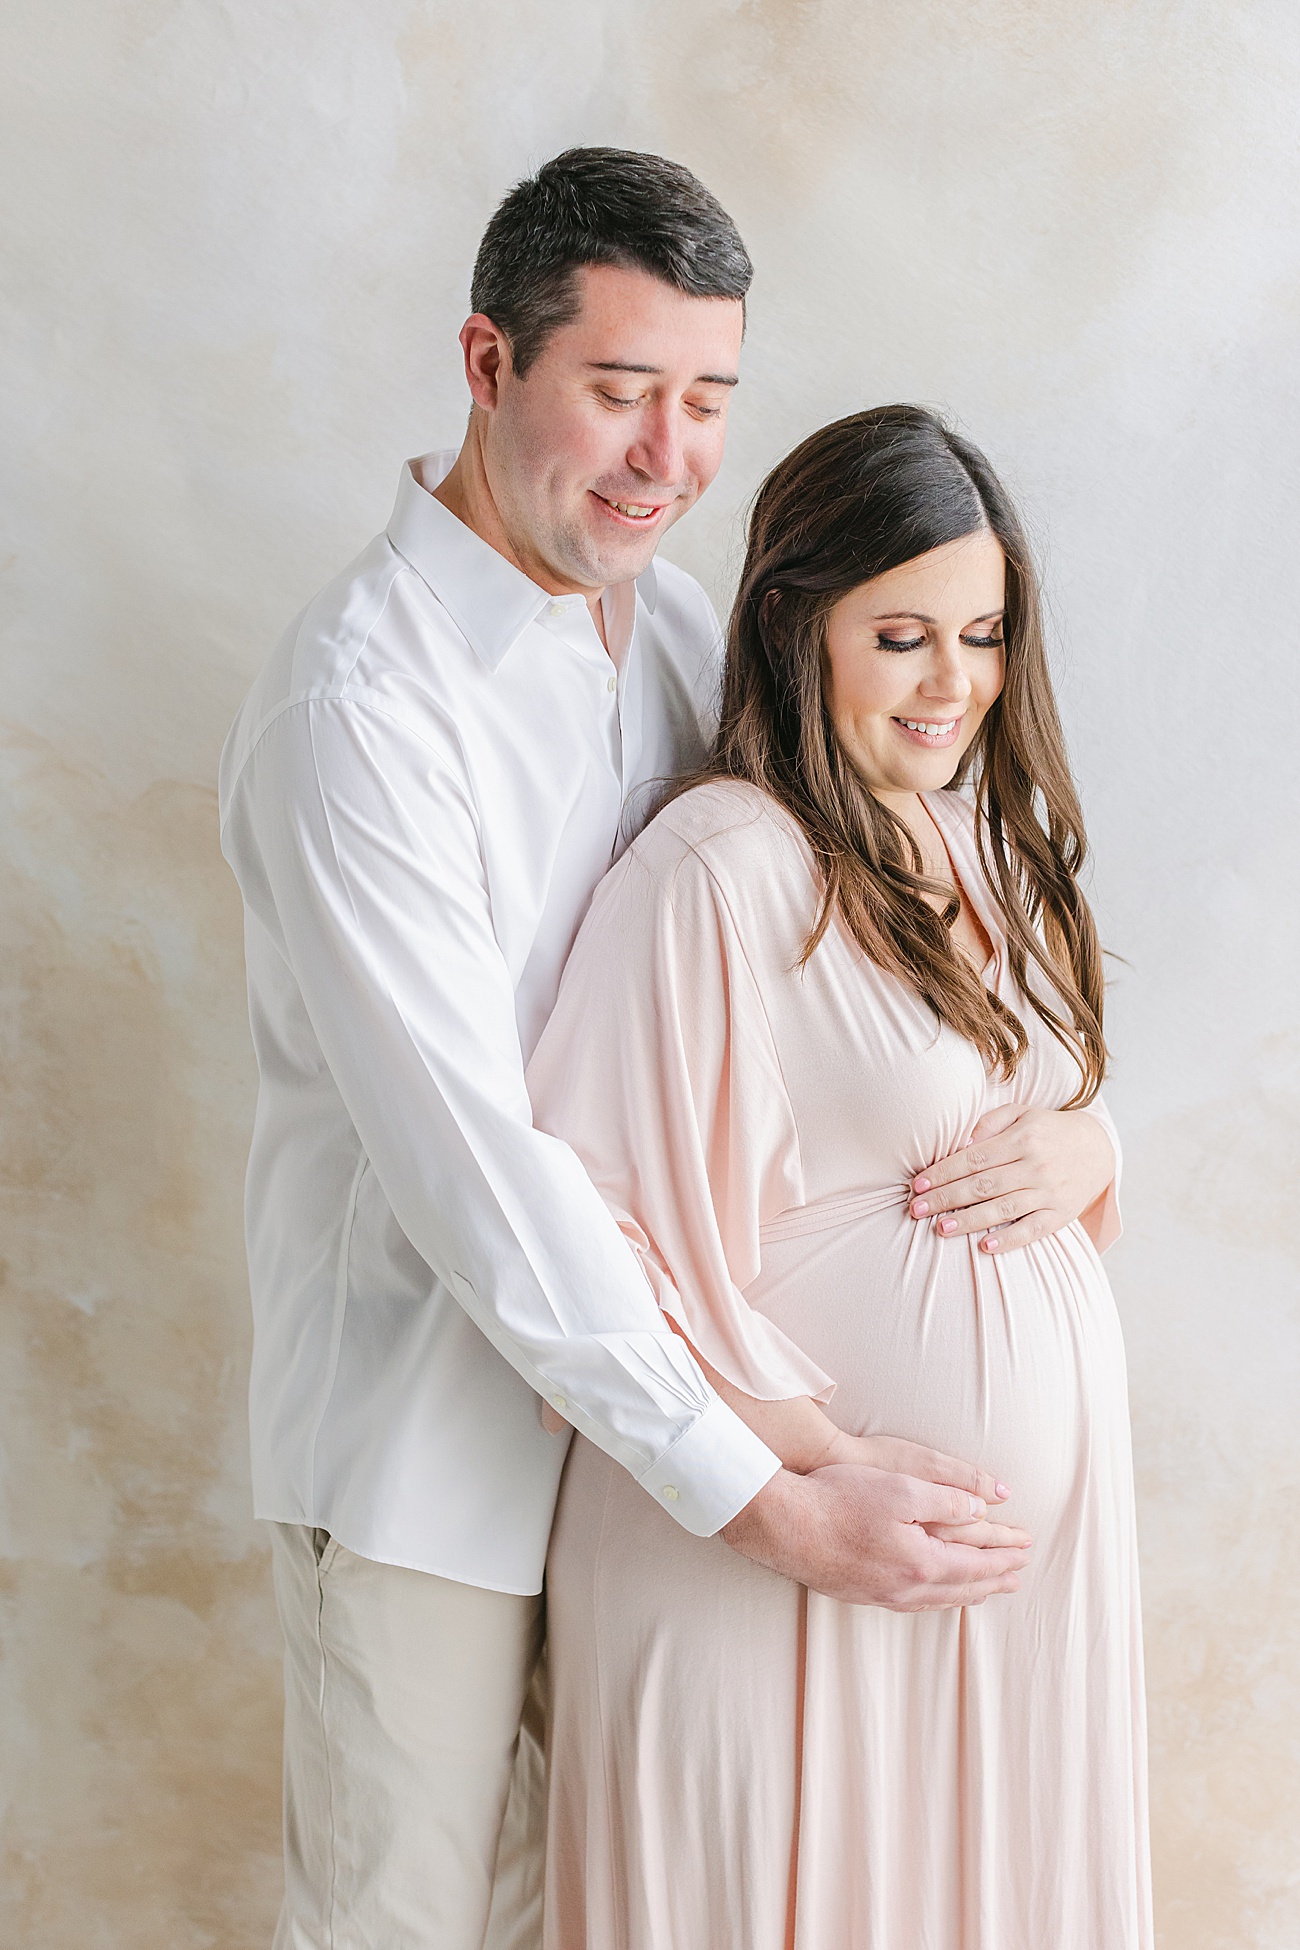 Expecting Mom and Dad hugging baby bump during studio maternity photos in Austin, TX. Photo by Sana Ahmed Photography.